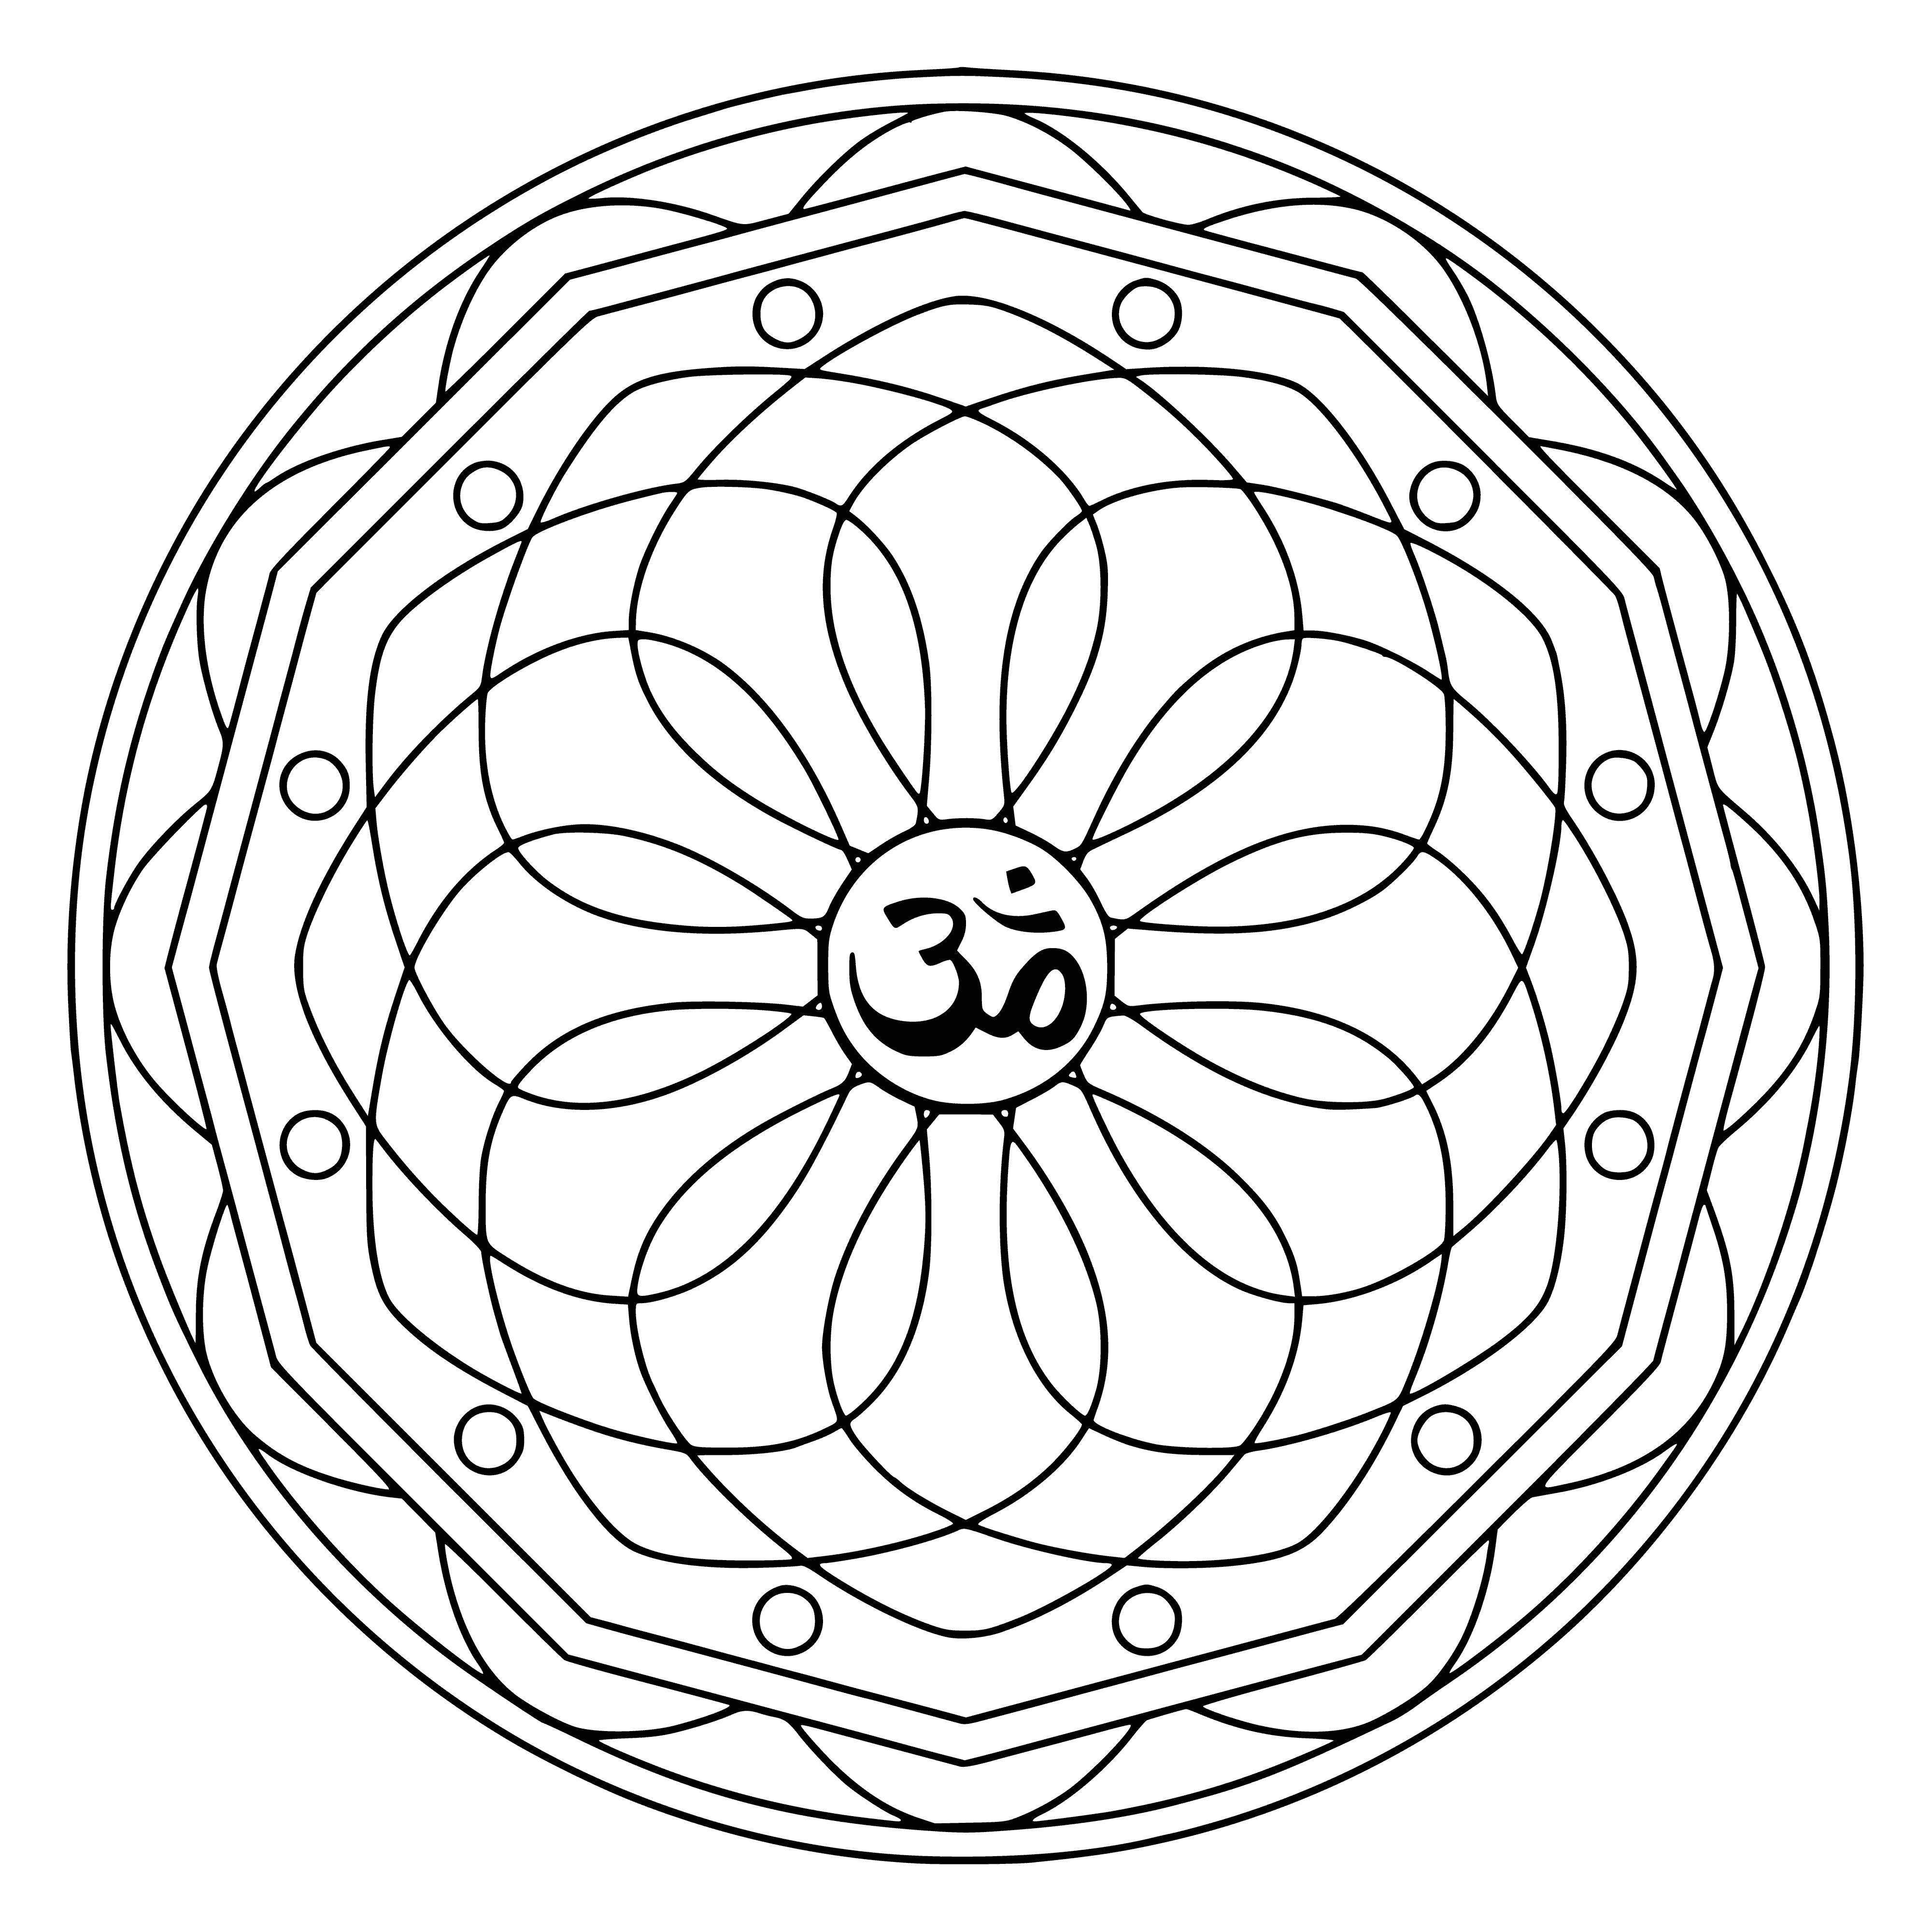 coloring page: A mandala is a symmetrical design made up of circles, triangles & squares, with Om in the center. Colors are calming. Balance & harmony are felt. #Mandala #meditation #Om